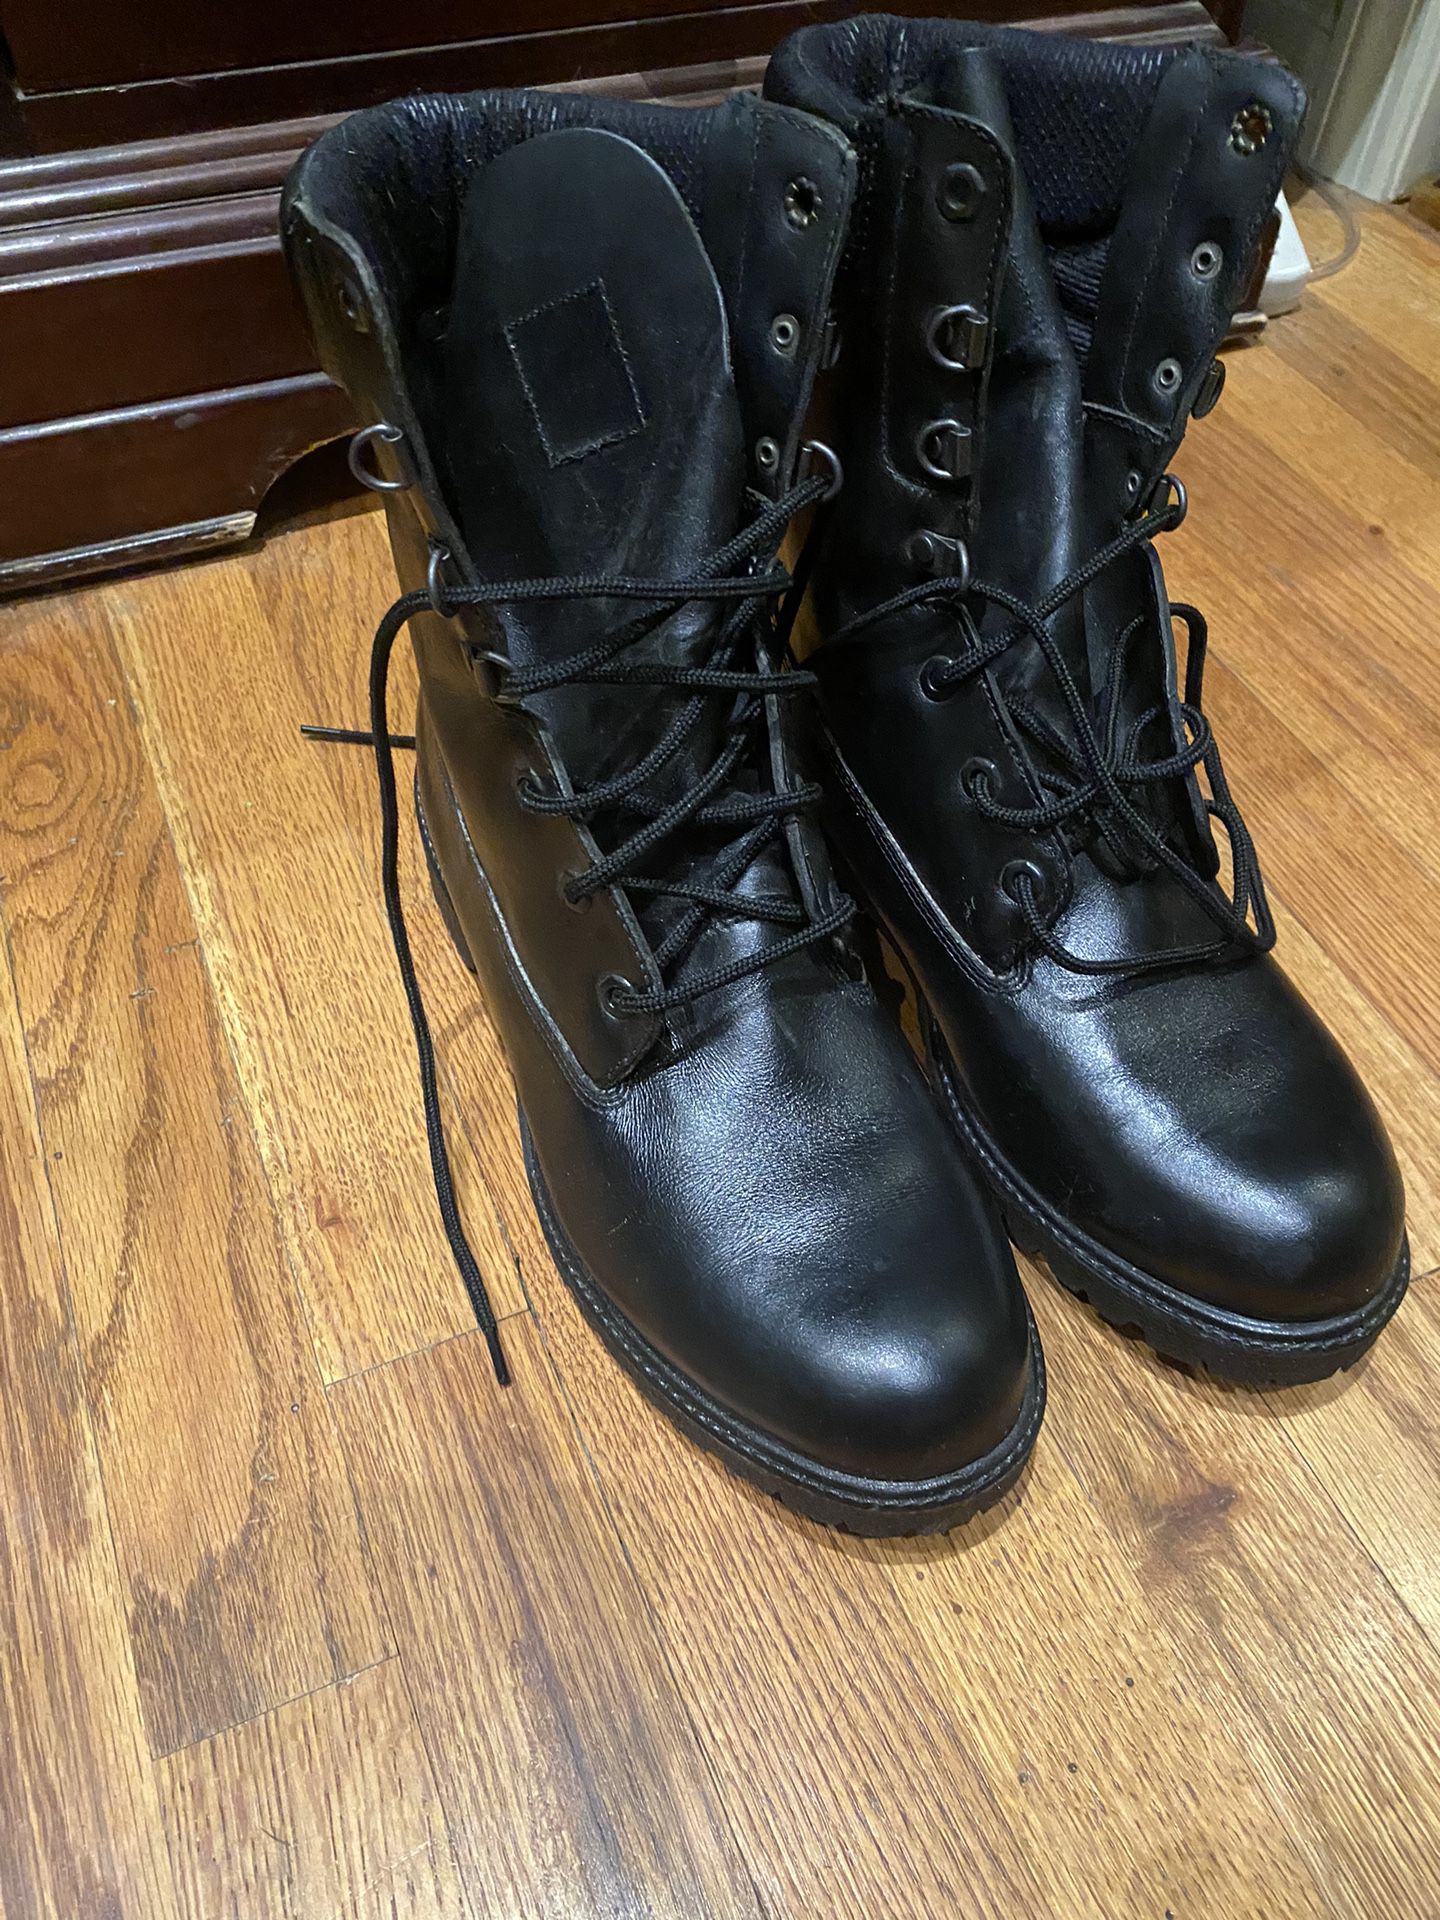 Brand New Rocky Boots(Men’s 10.5) for Sale in Massapequa Park, NY - OfferUp